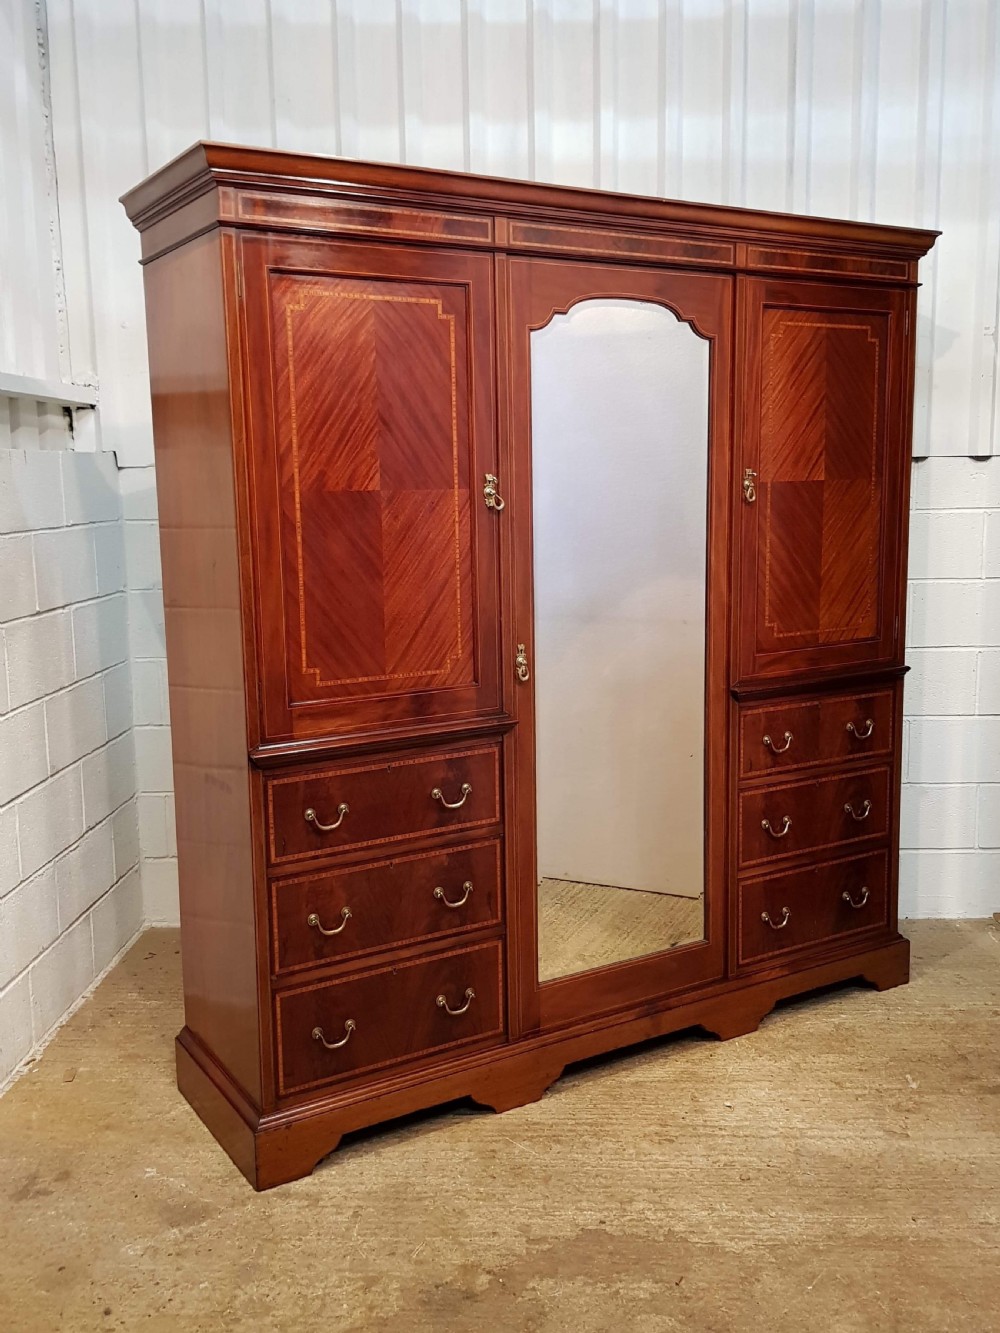 antique late victorian mahogany inlaid triple wardrobe compactum by jas schoolbred c1890